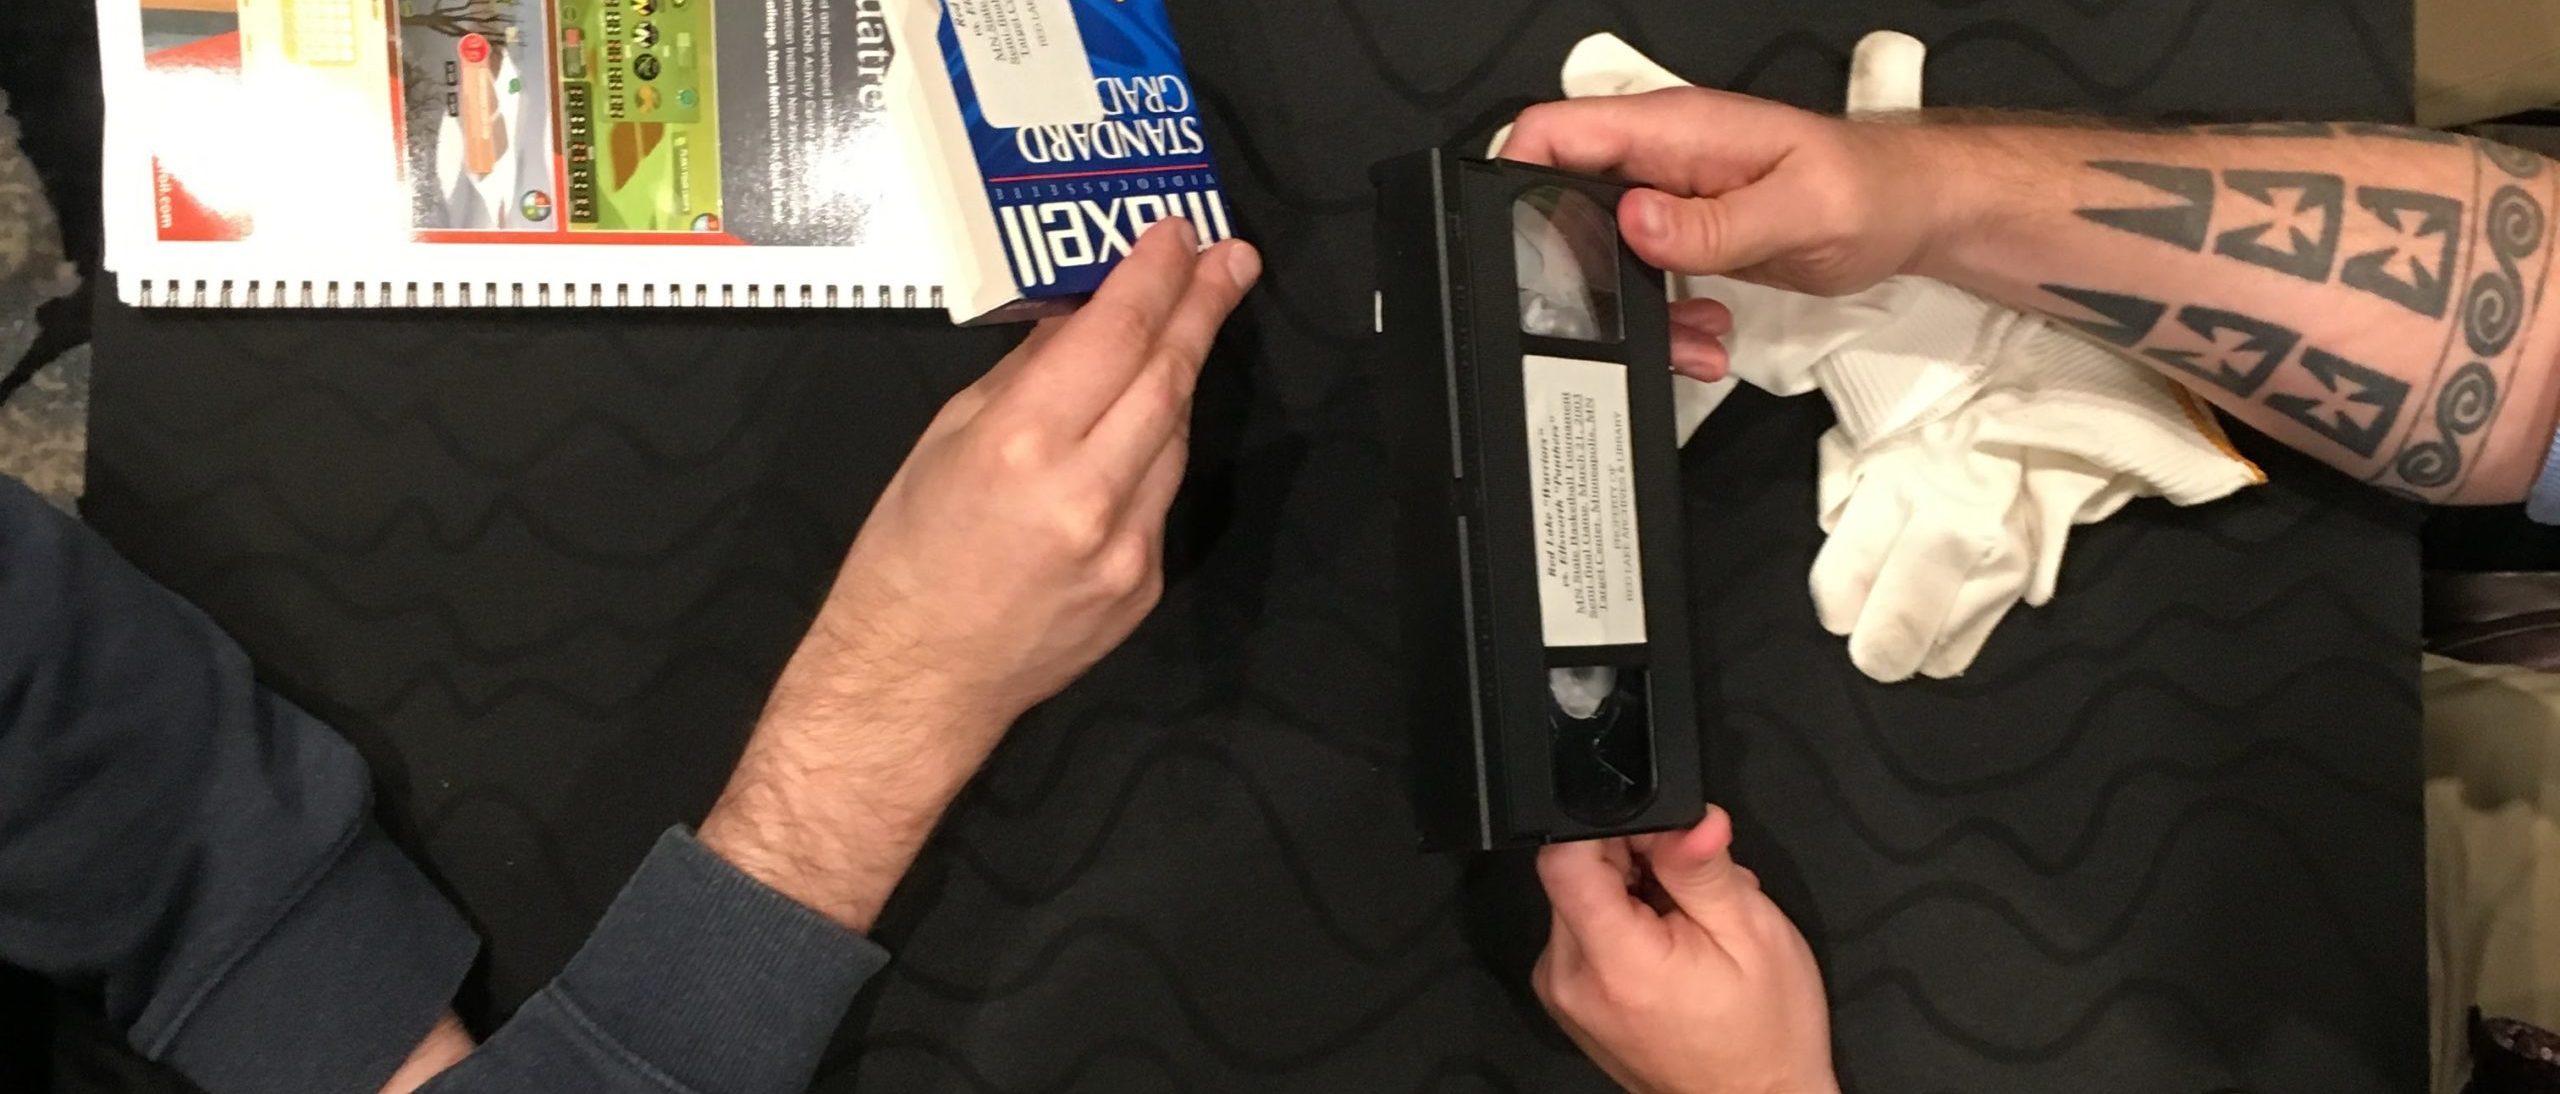 Archivists inspect a video cassette at the ATALM Audiovisual Collections Care in Tribal Archives workshop, 2018.